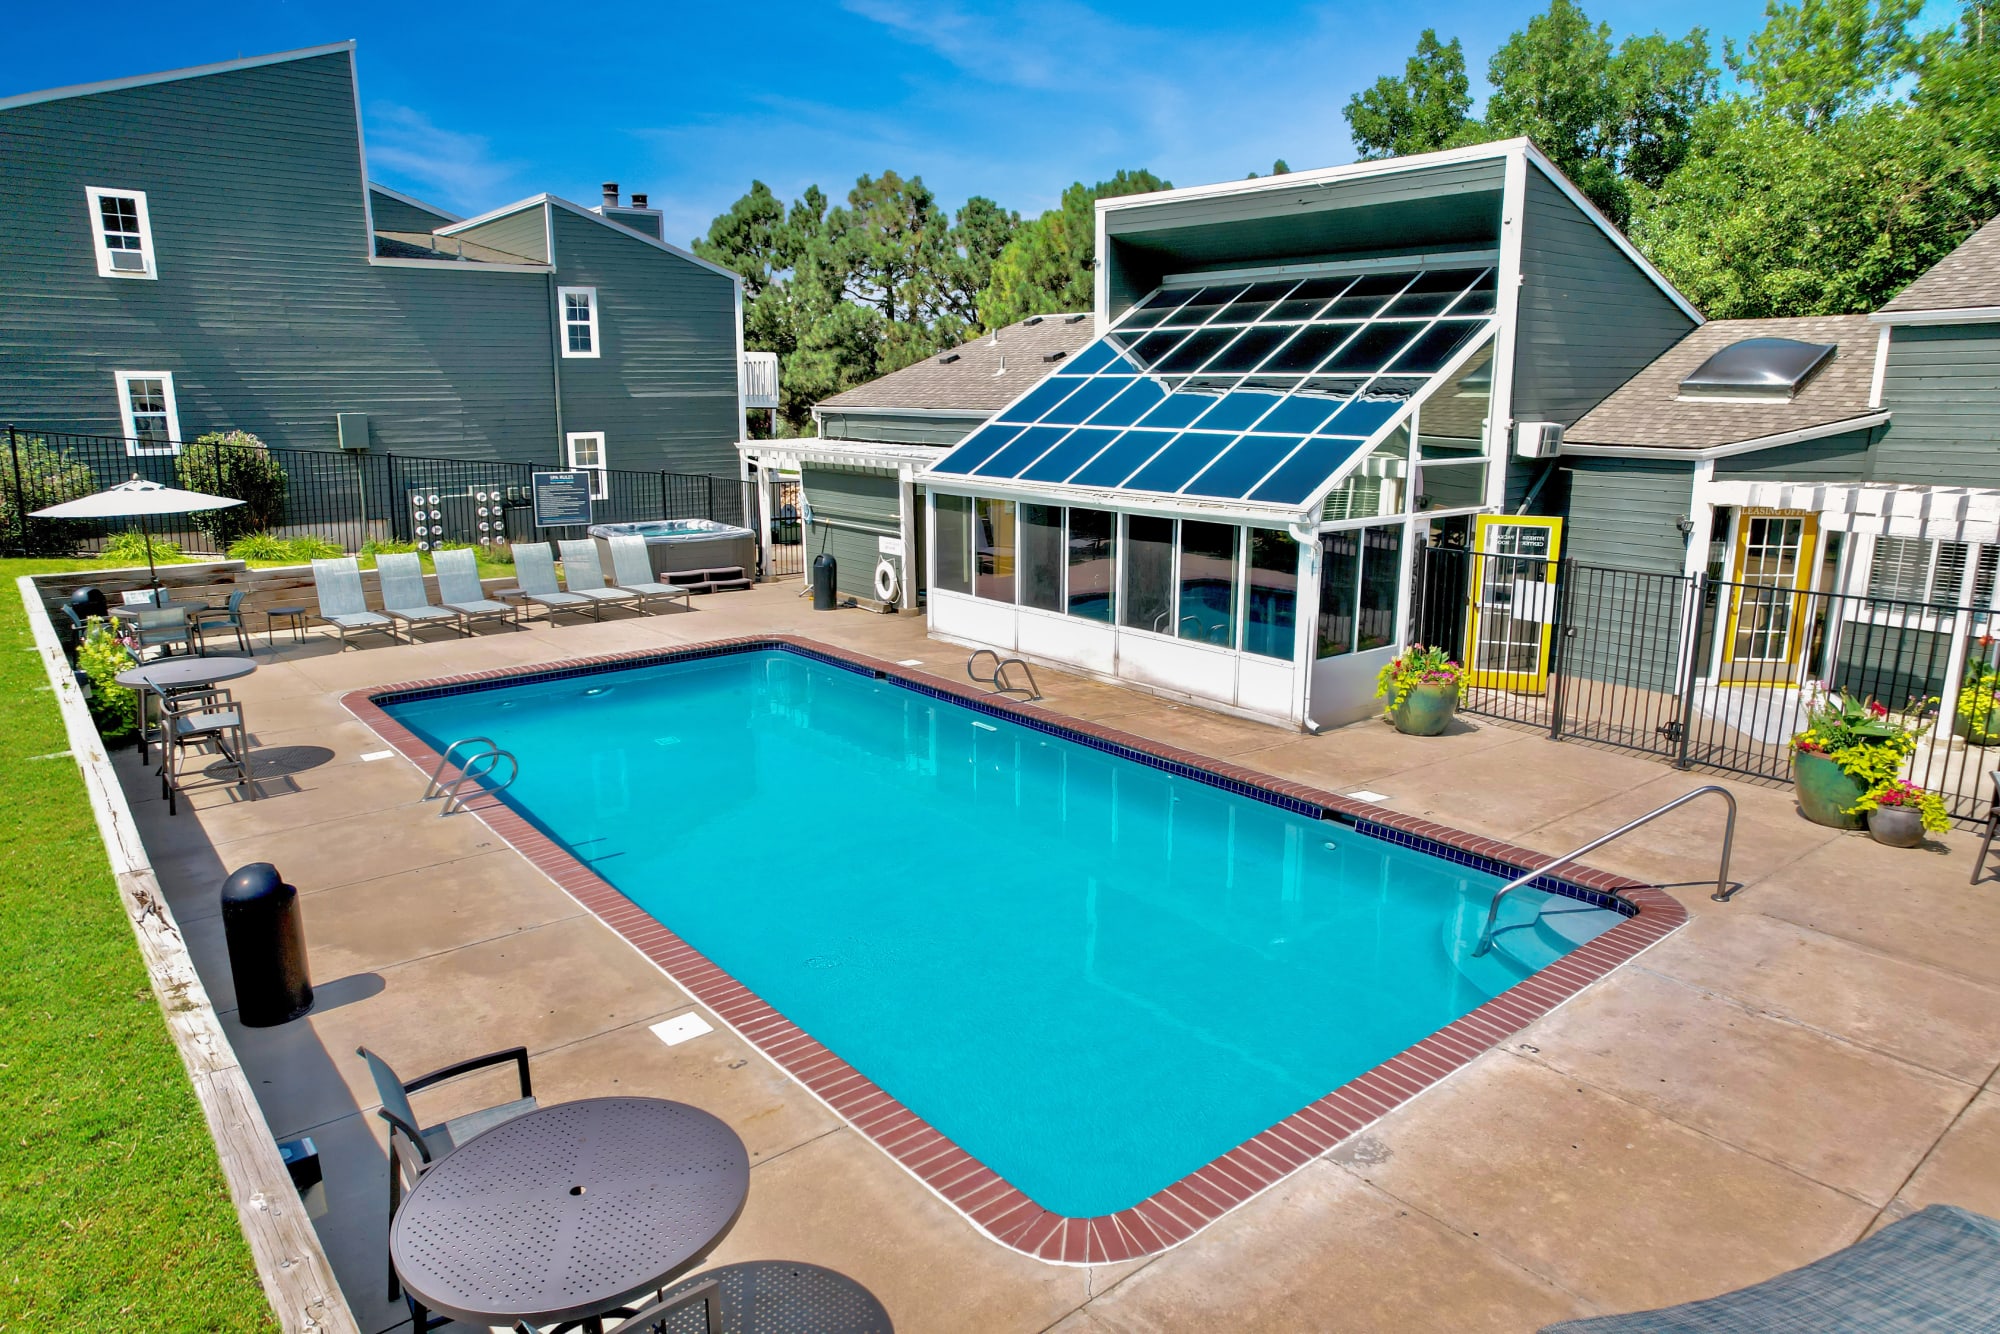 Relaxing lounge chairs by the pool at Bluesky Landing Apartments in Lakewood, Colorado